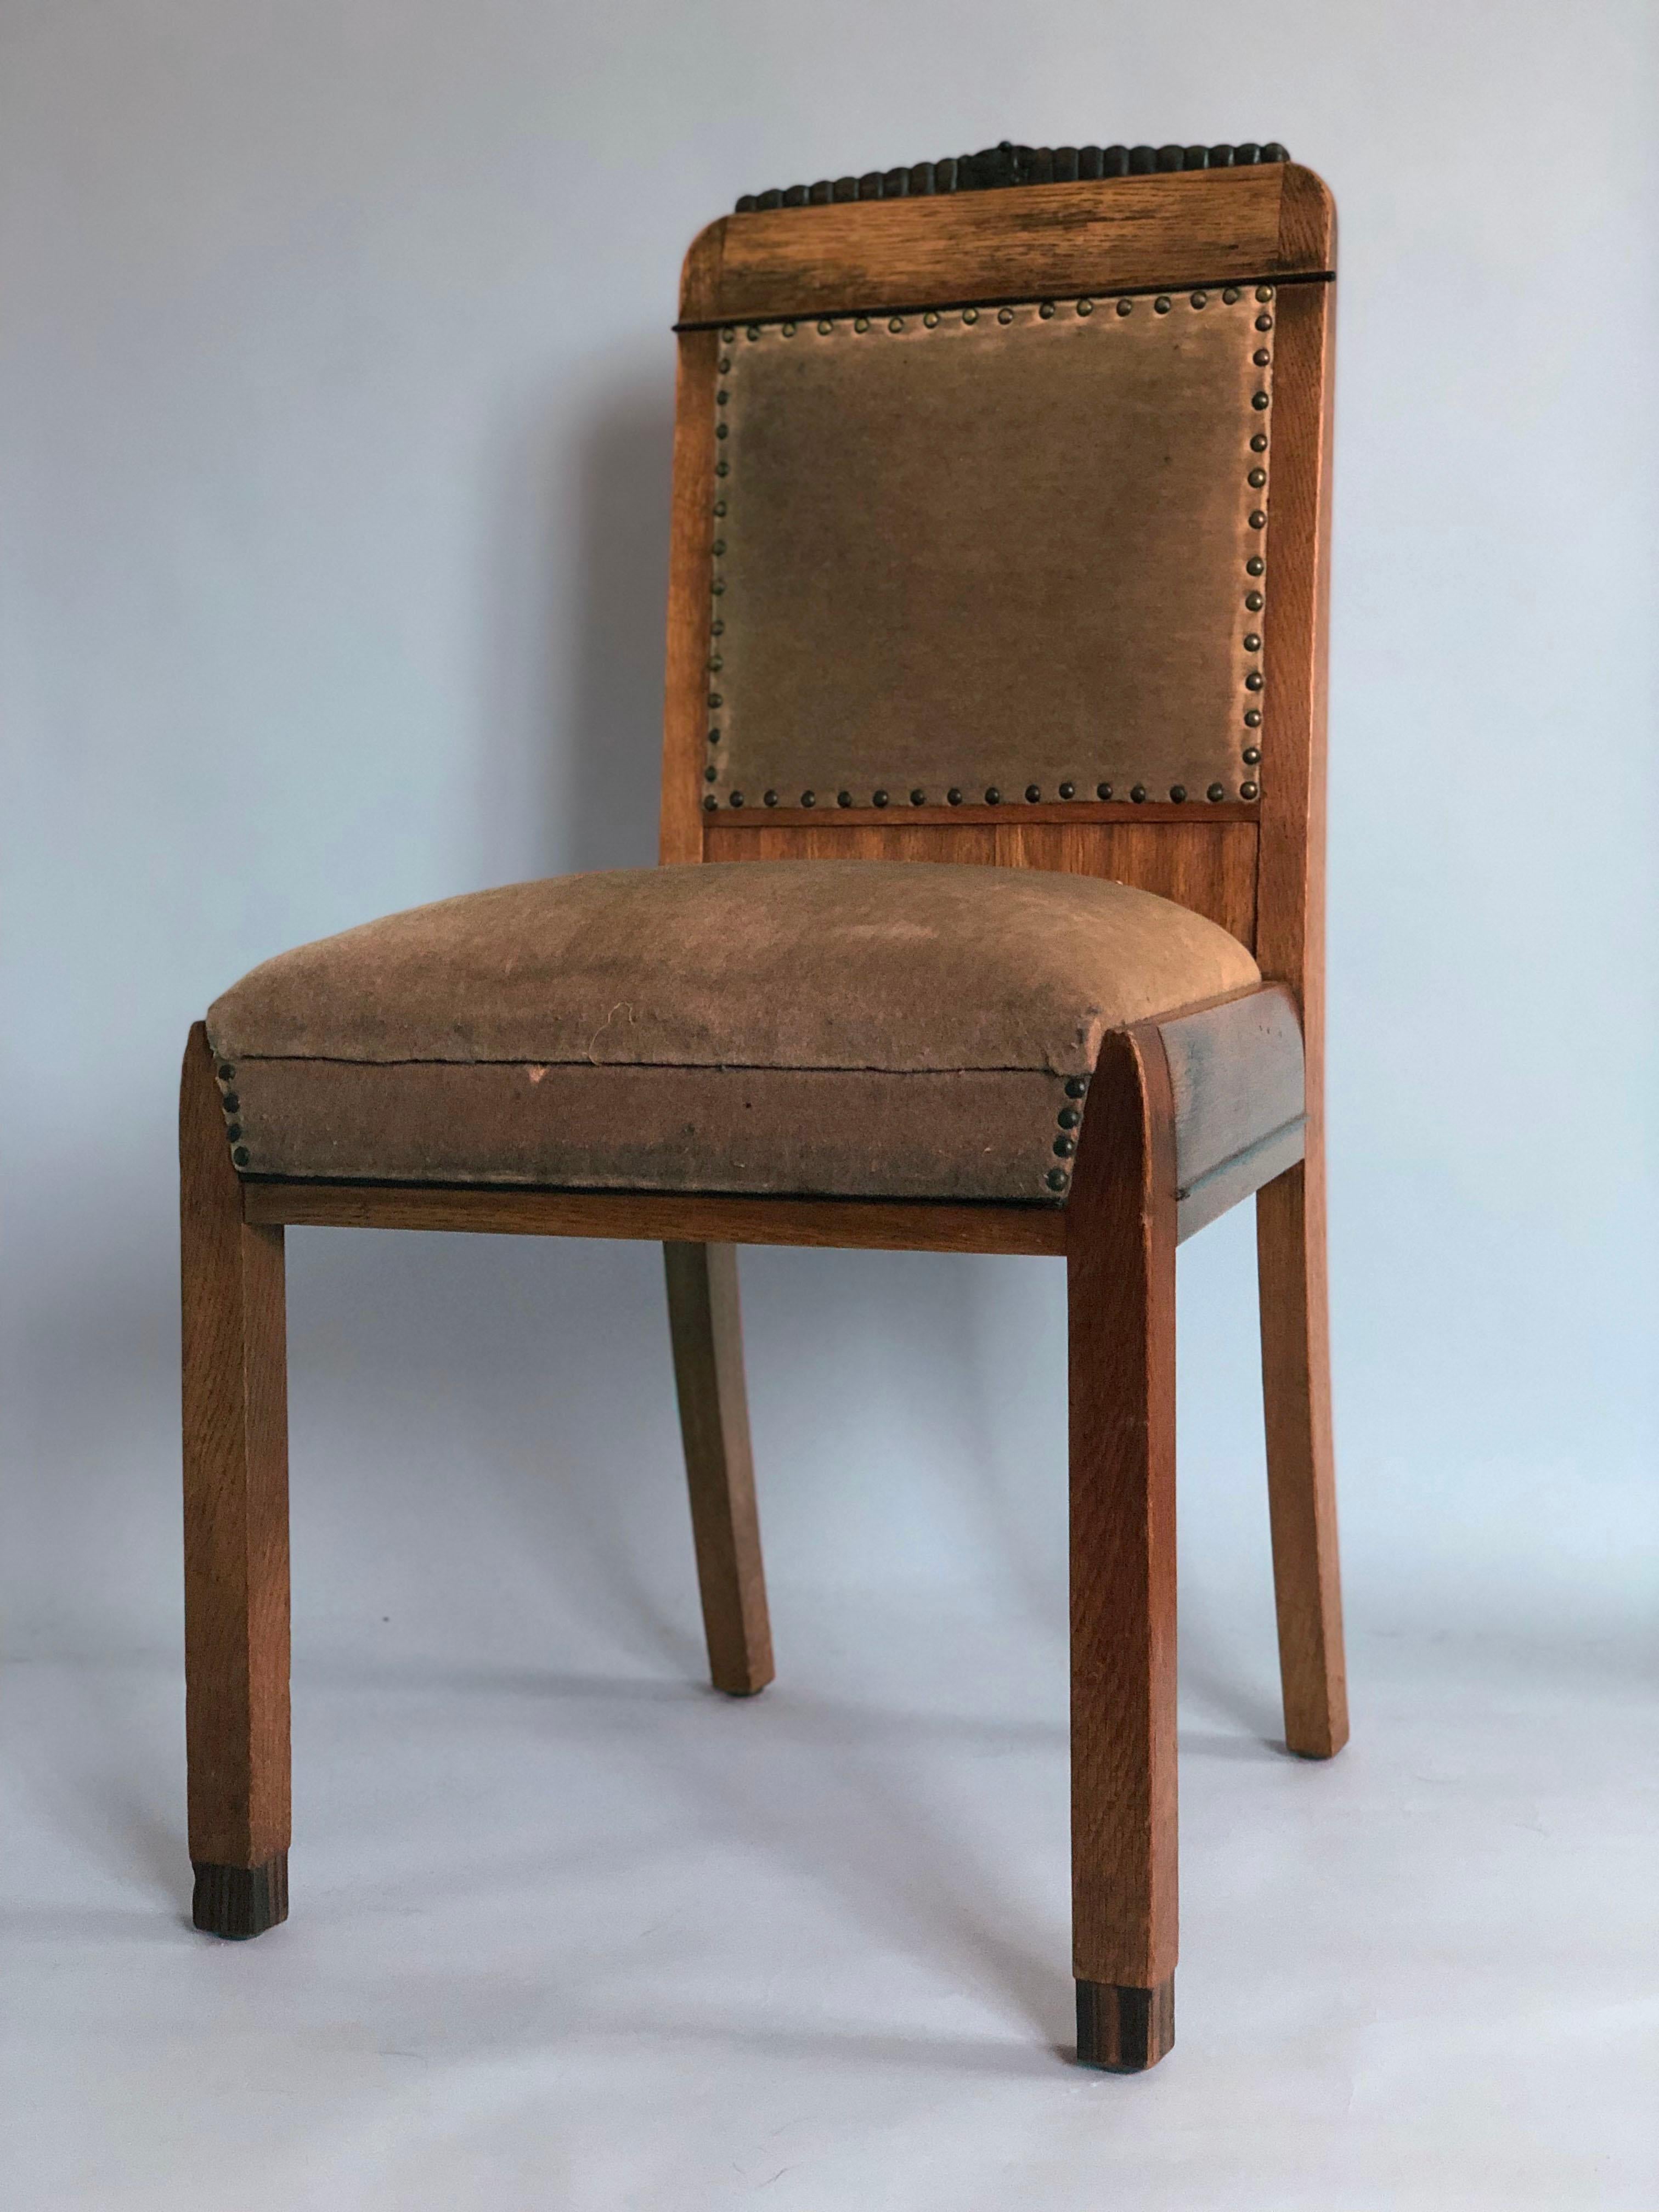 Art Deco Detailed Amsterdam School Chair 1920s  For Sale 2